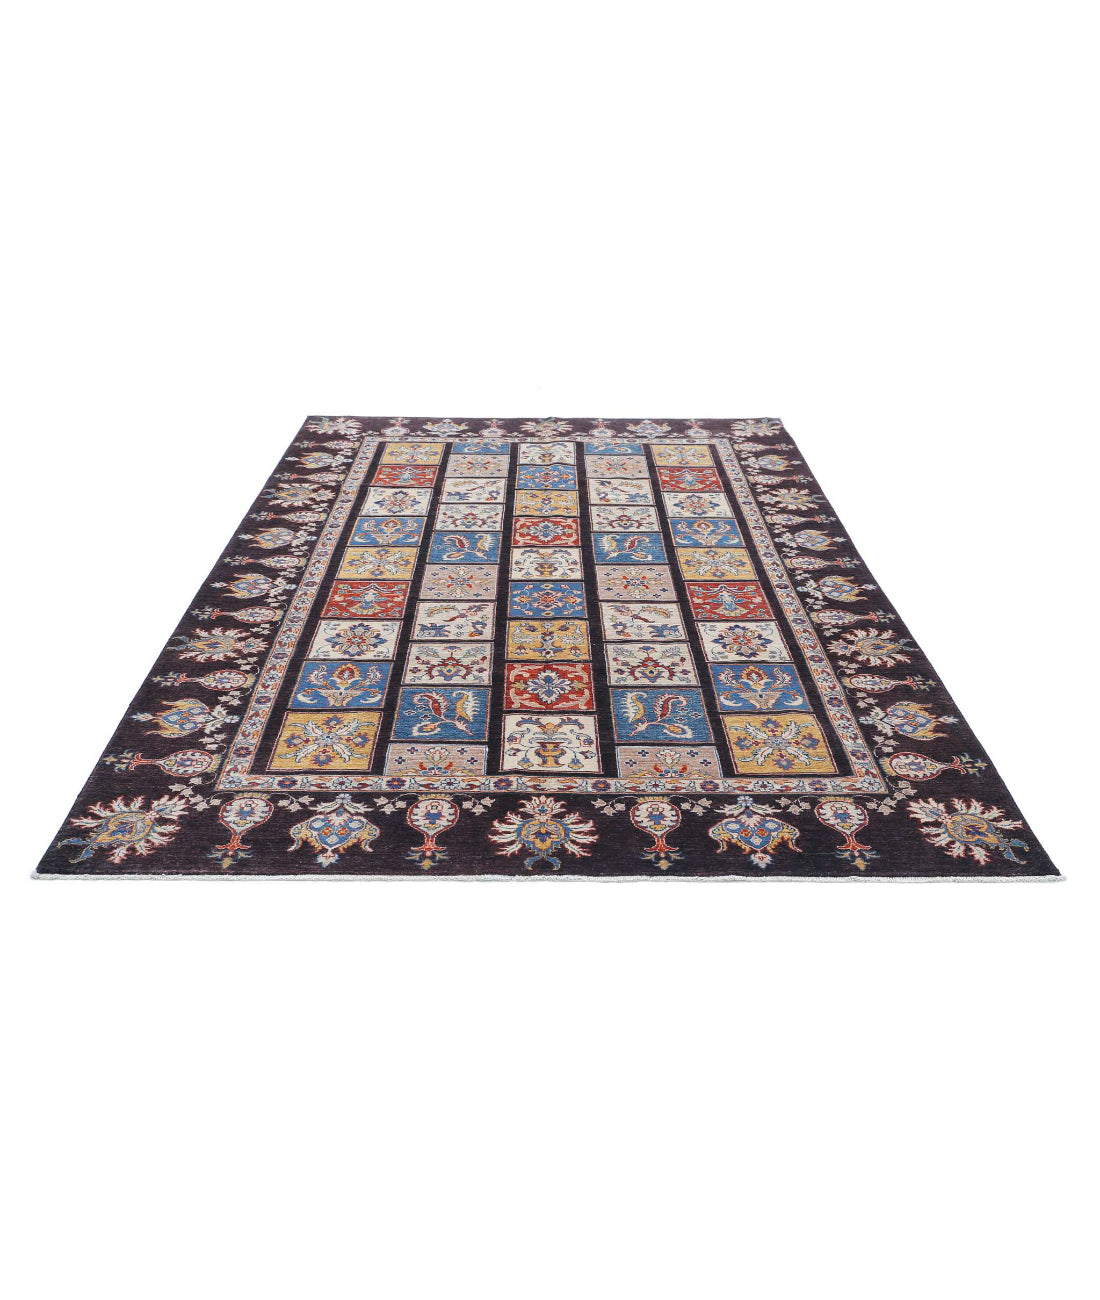 Hand Knotted Bakhtiari Wool Rug - 6'5'' x 9'8'' 6'5'' x 9'8'' (193 X 290) / Brown / Blue